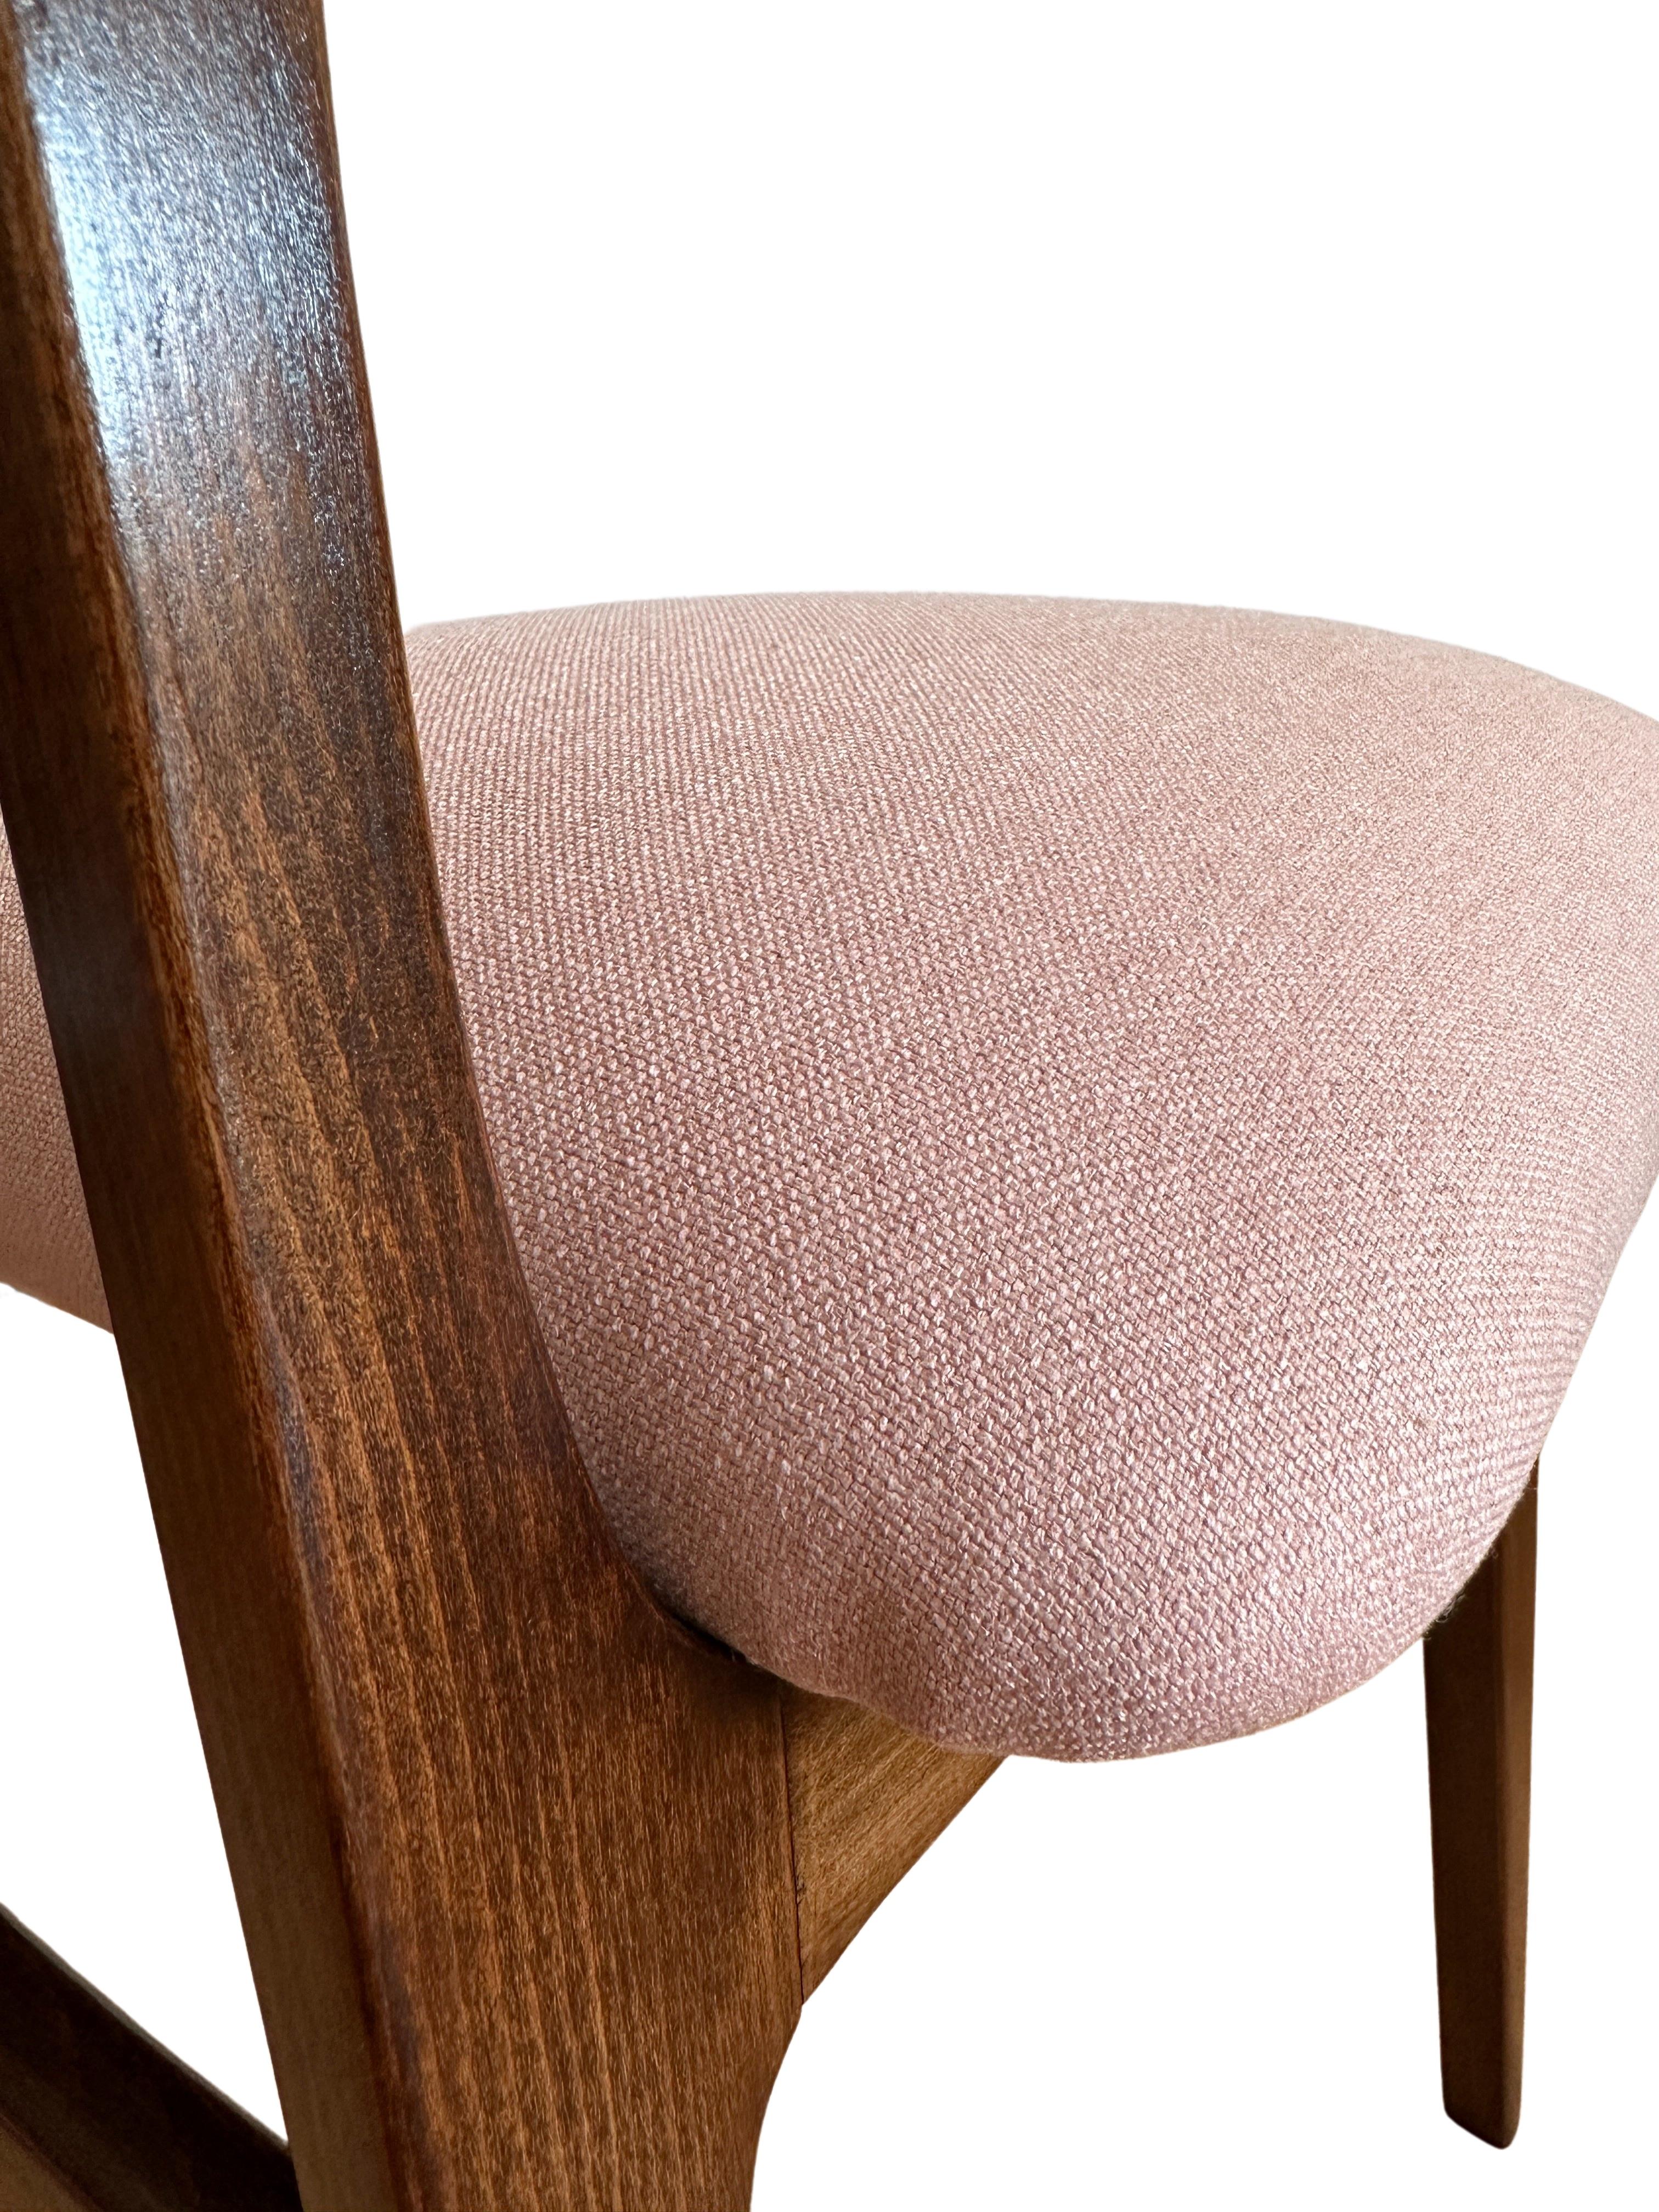 Mid-Century Modern Midcentury Wooden Dining Chair in Light Pink Upholstery, Europe, 1960s For Sale